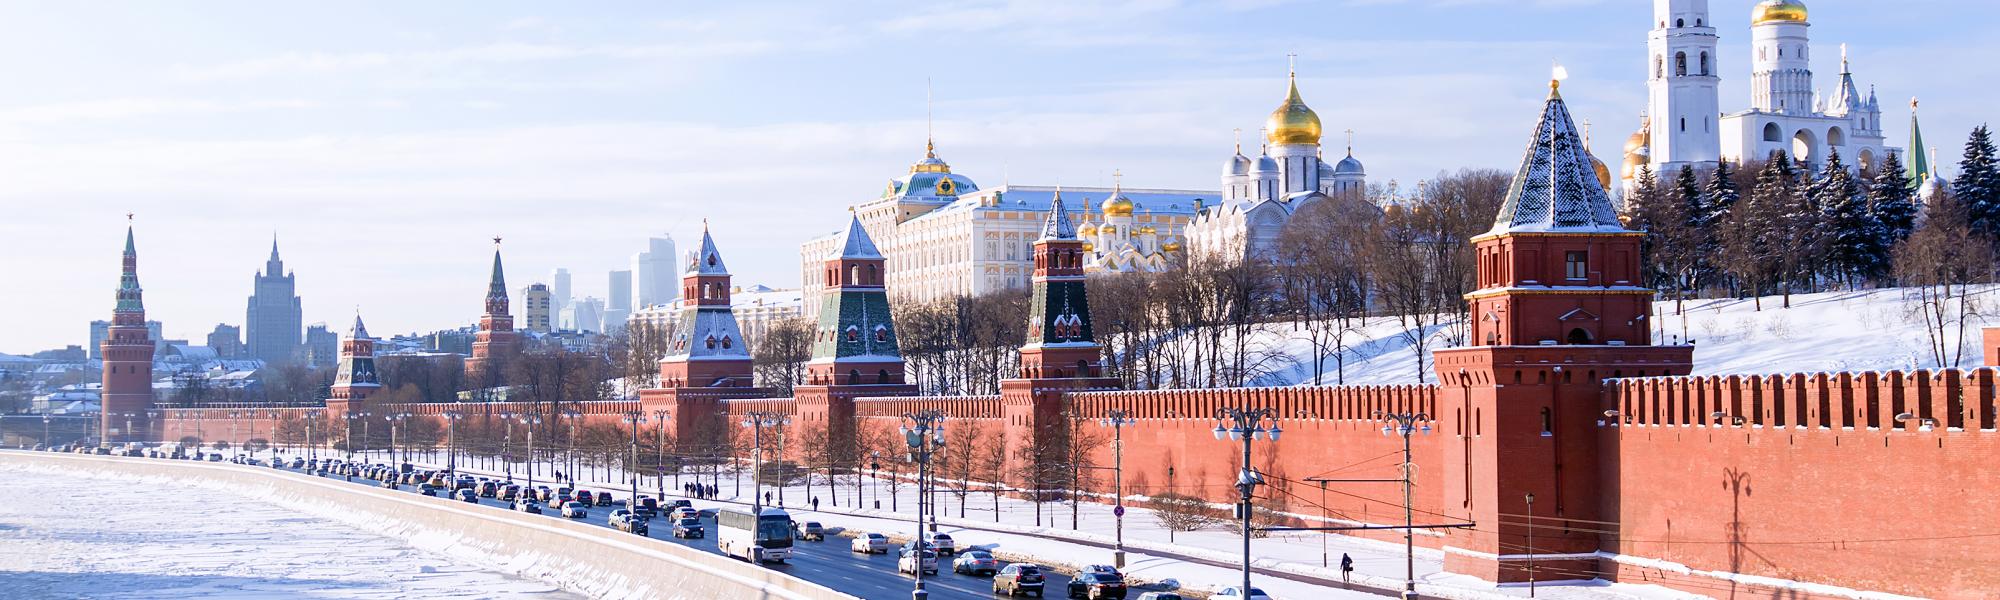 Russia – Ministry of Transport on trade with China, new transport corridors and bridging East with West.